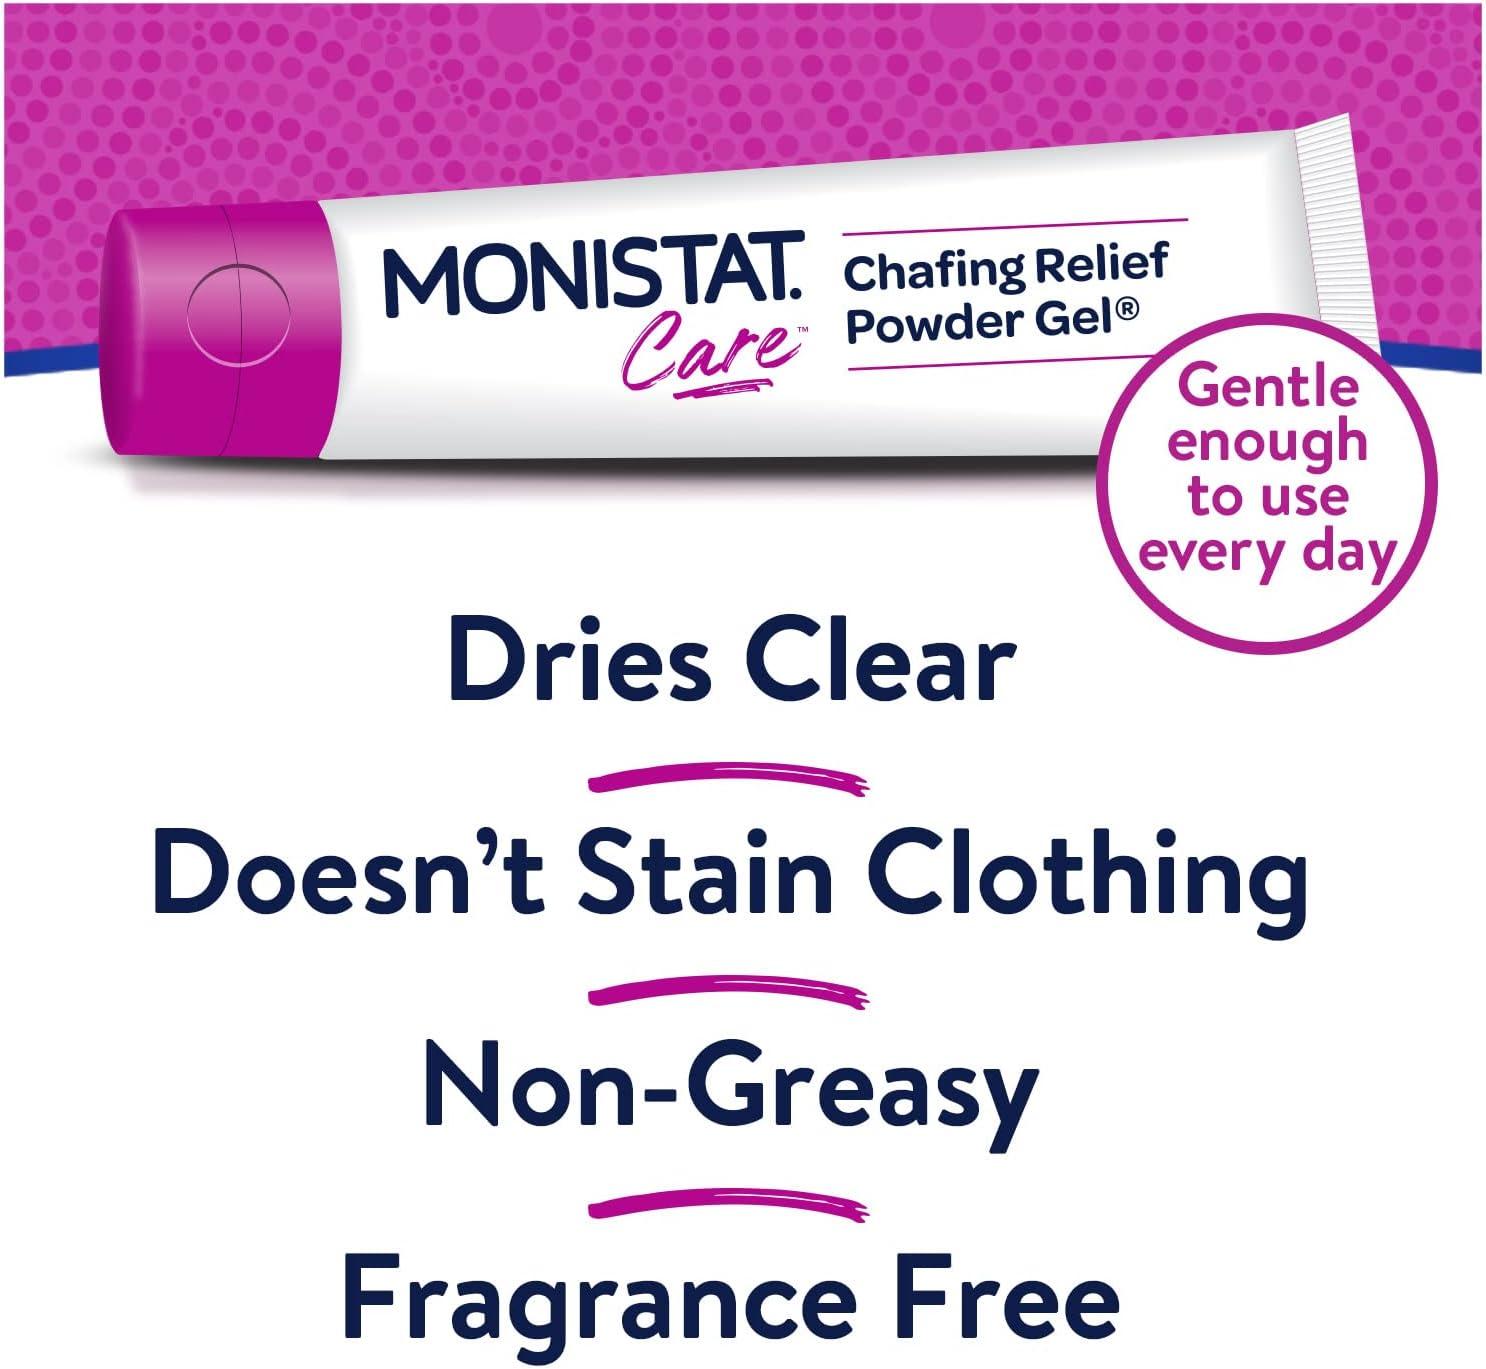 MONISTAT Care Chafing Relief Powder Gel, Anti-Chafe Protection, 1.5 oz, 4  Pack 1.5 Ounce (Pack of 4)